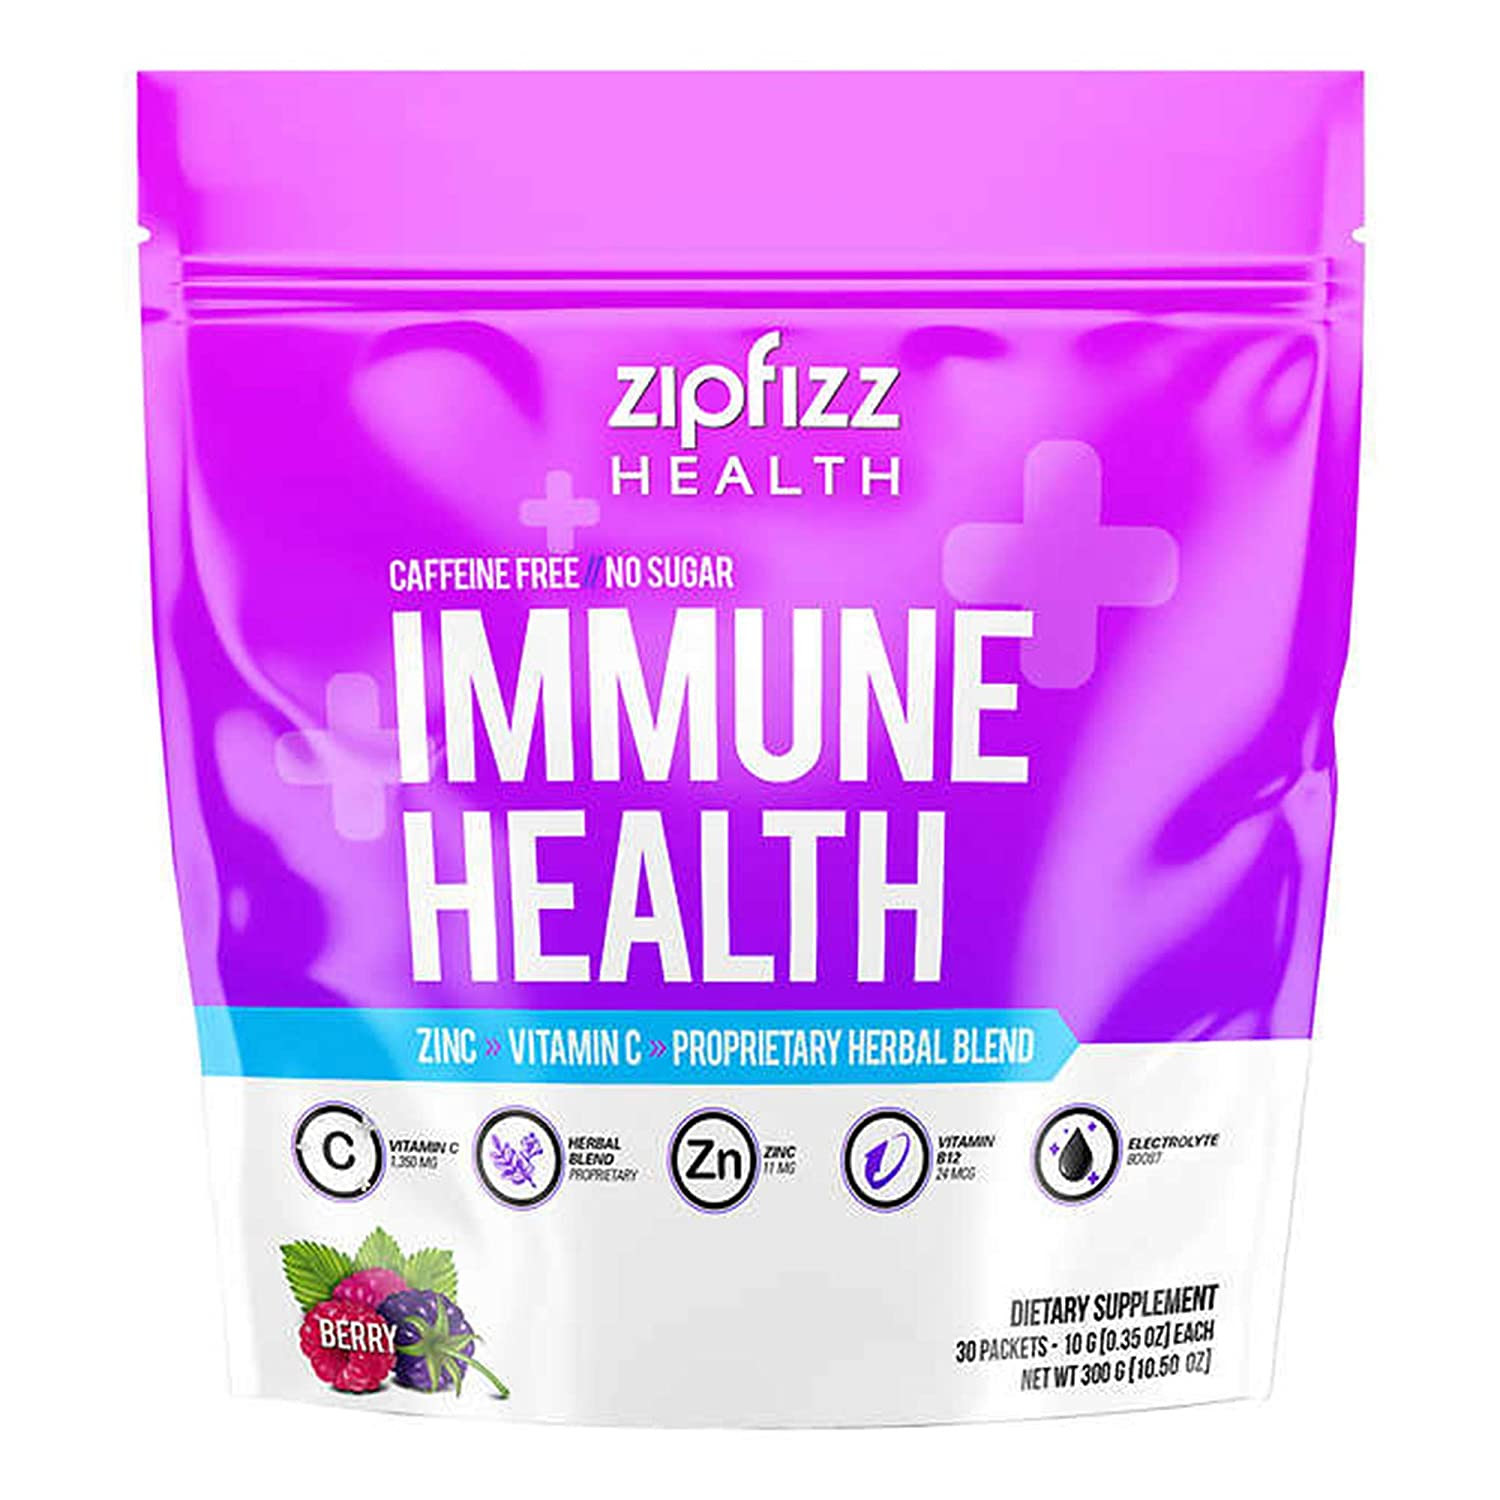 Zipfizz Immune Health Drink Mix. 15,000 units. EXW Los Angeles $3.55/pack of 30counts.